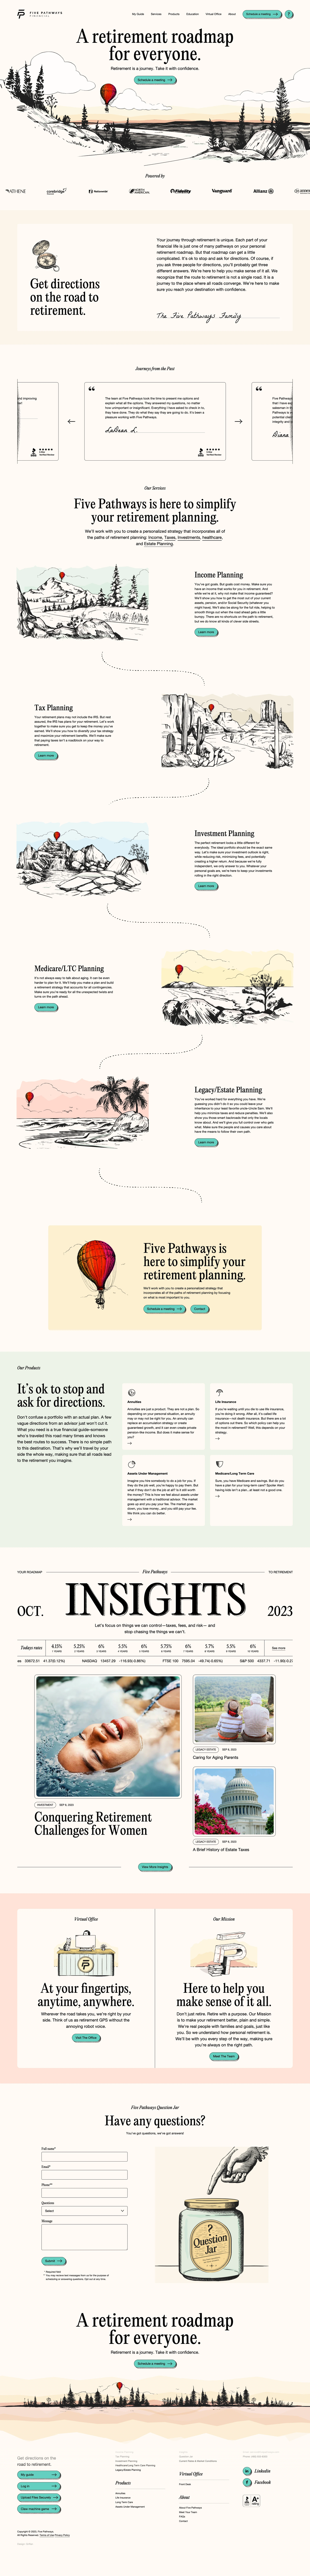 Five Pathways Landing Page Example: A retirement roadmap for everyone. Retirement is a journey. Take it with confidence. Five Pathways is here to simplify your retirement planning. We’ll work with you to create a personalized strategy that incorporates all of the paths of retirement planning: Income, Taxes, Investments, healthcare, and Estate Planning.